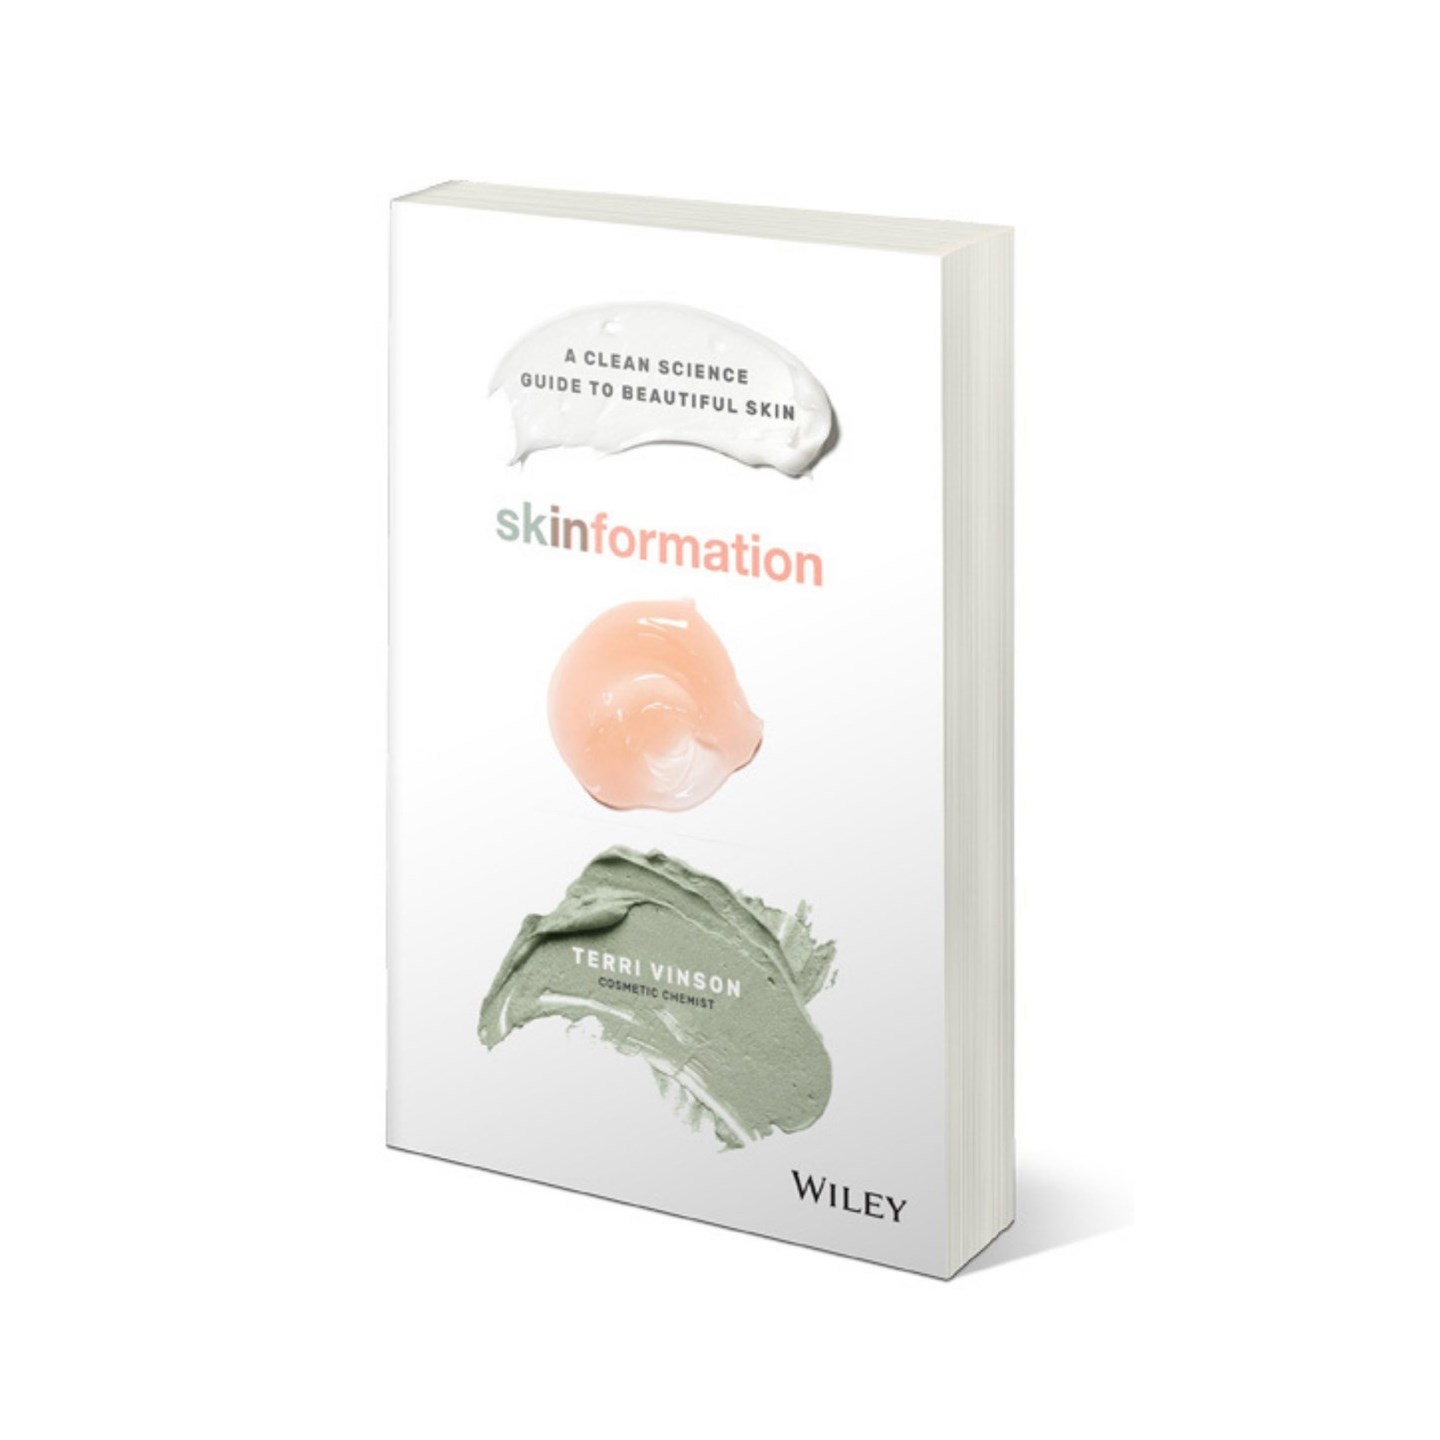  skinformation - A Clean Science Guide to Beautiful Skin